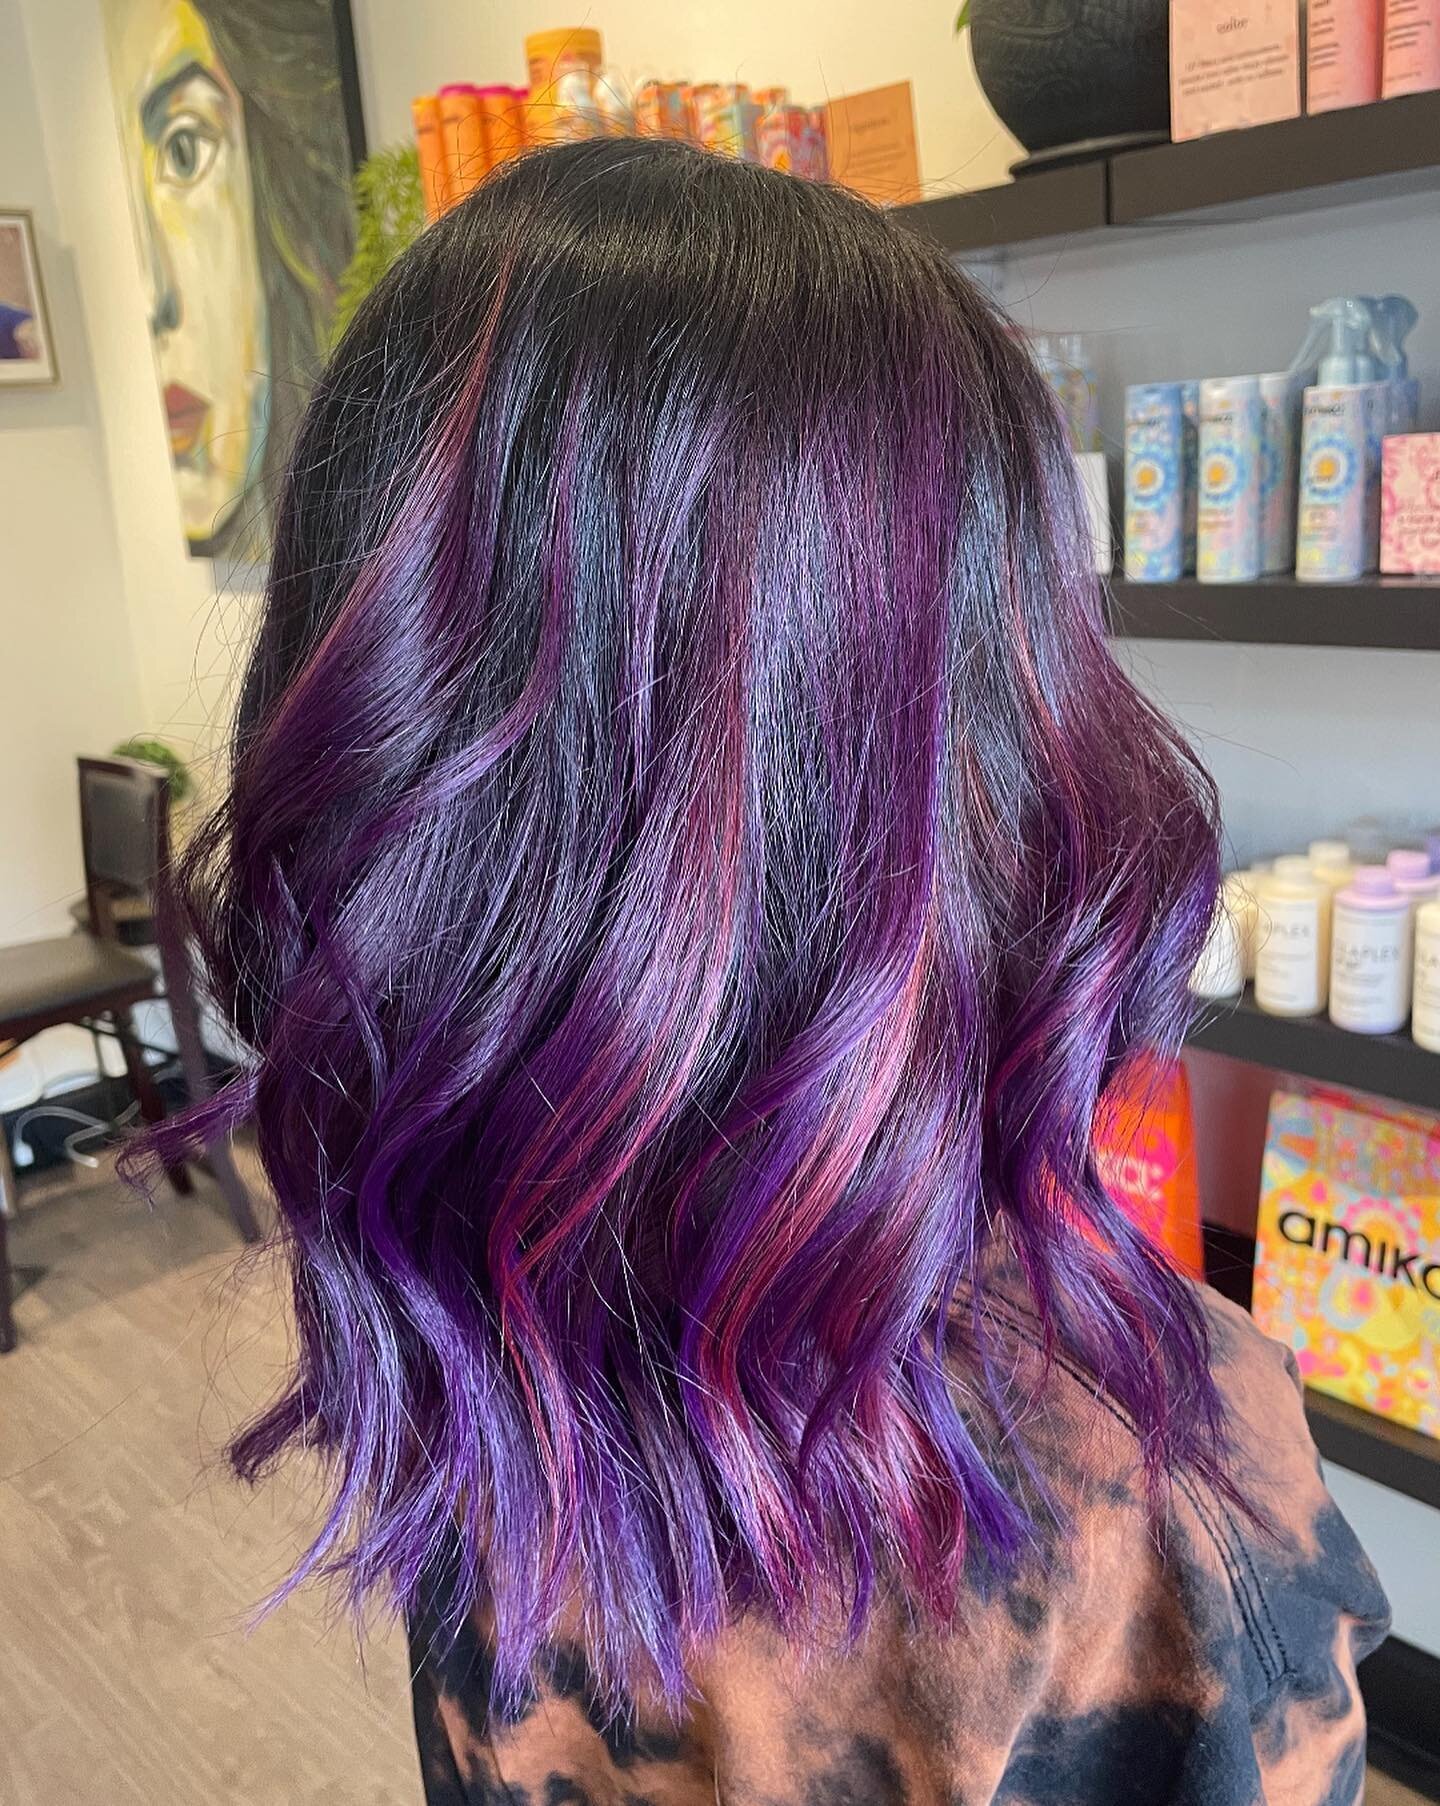 Violet balayage with Coral accents💜💜 by @codyallenhair 

#haircolor #violethair #purple #coralaccents #hairsalon #hair #chicagosalon #rksalonchicago #rksalon